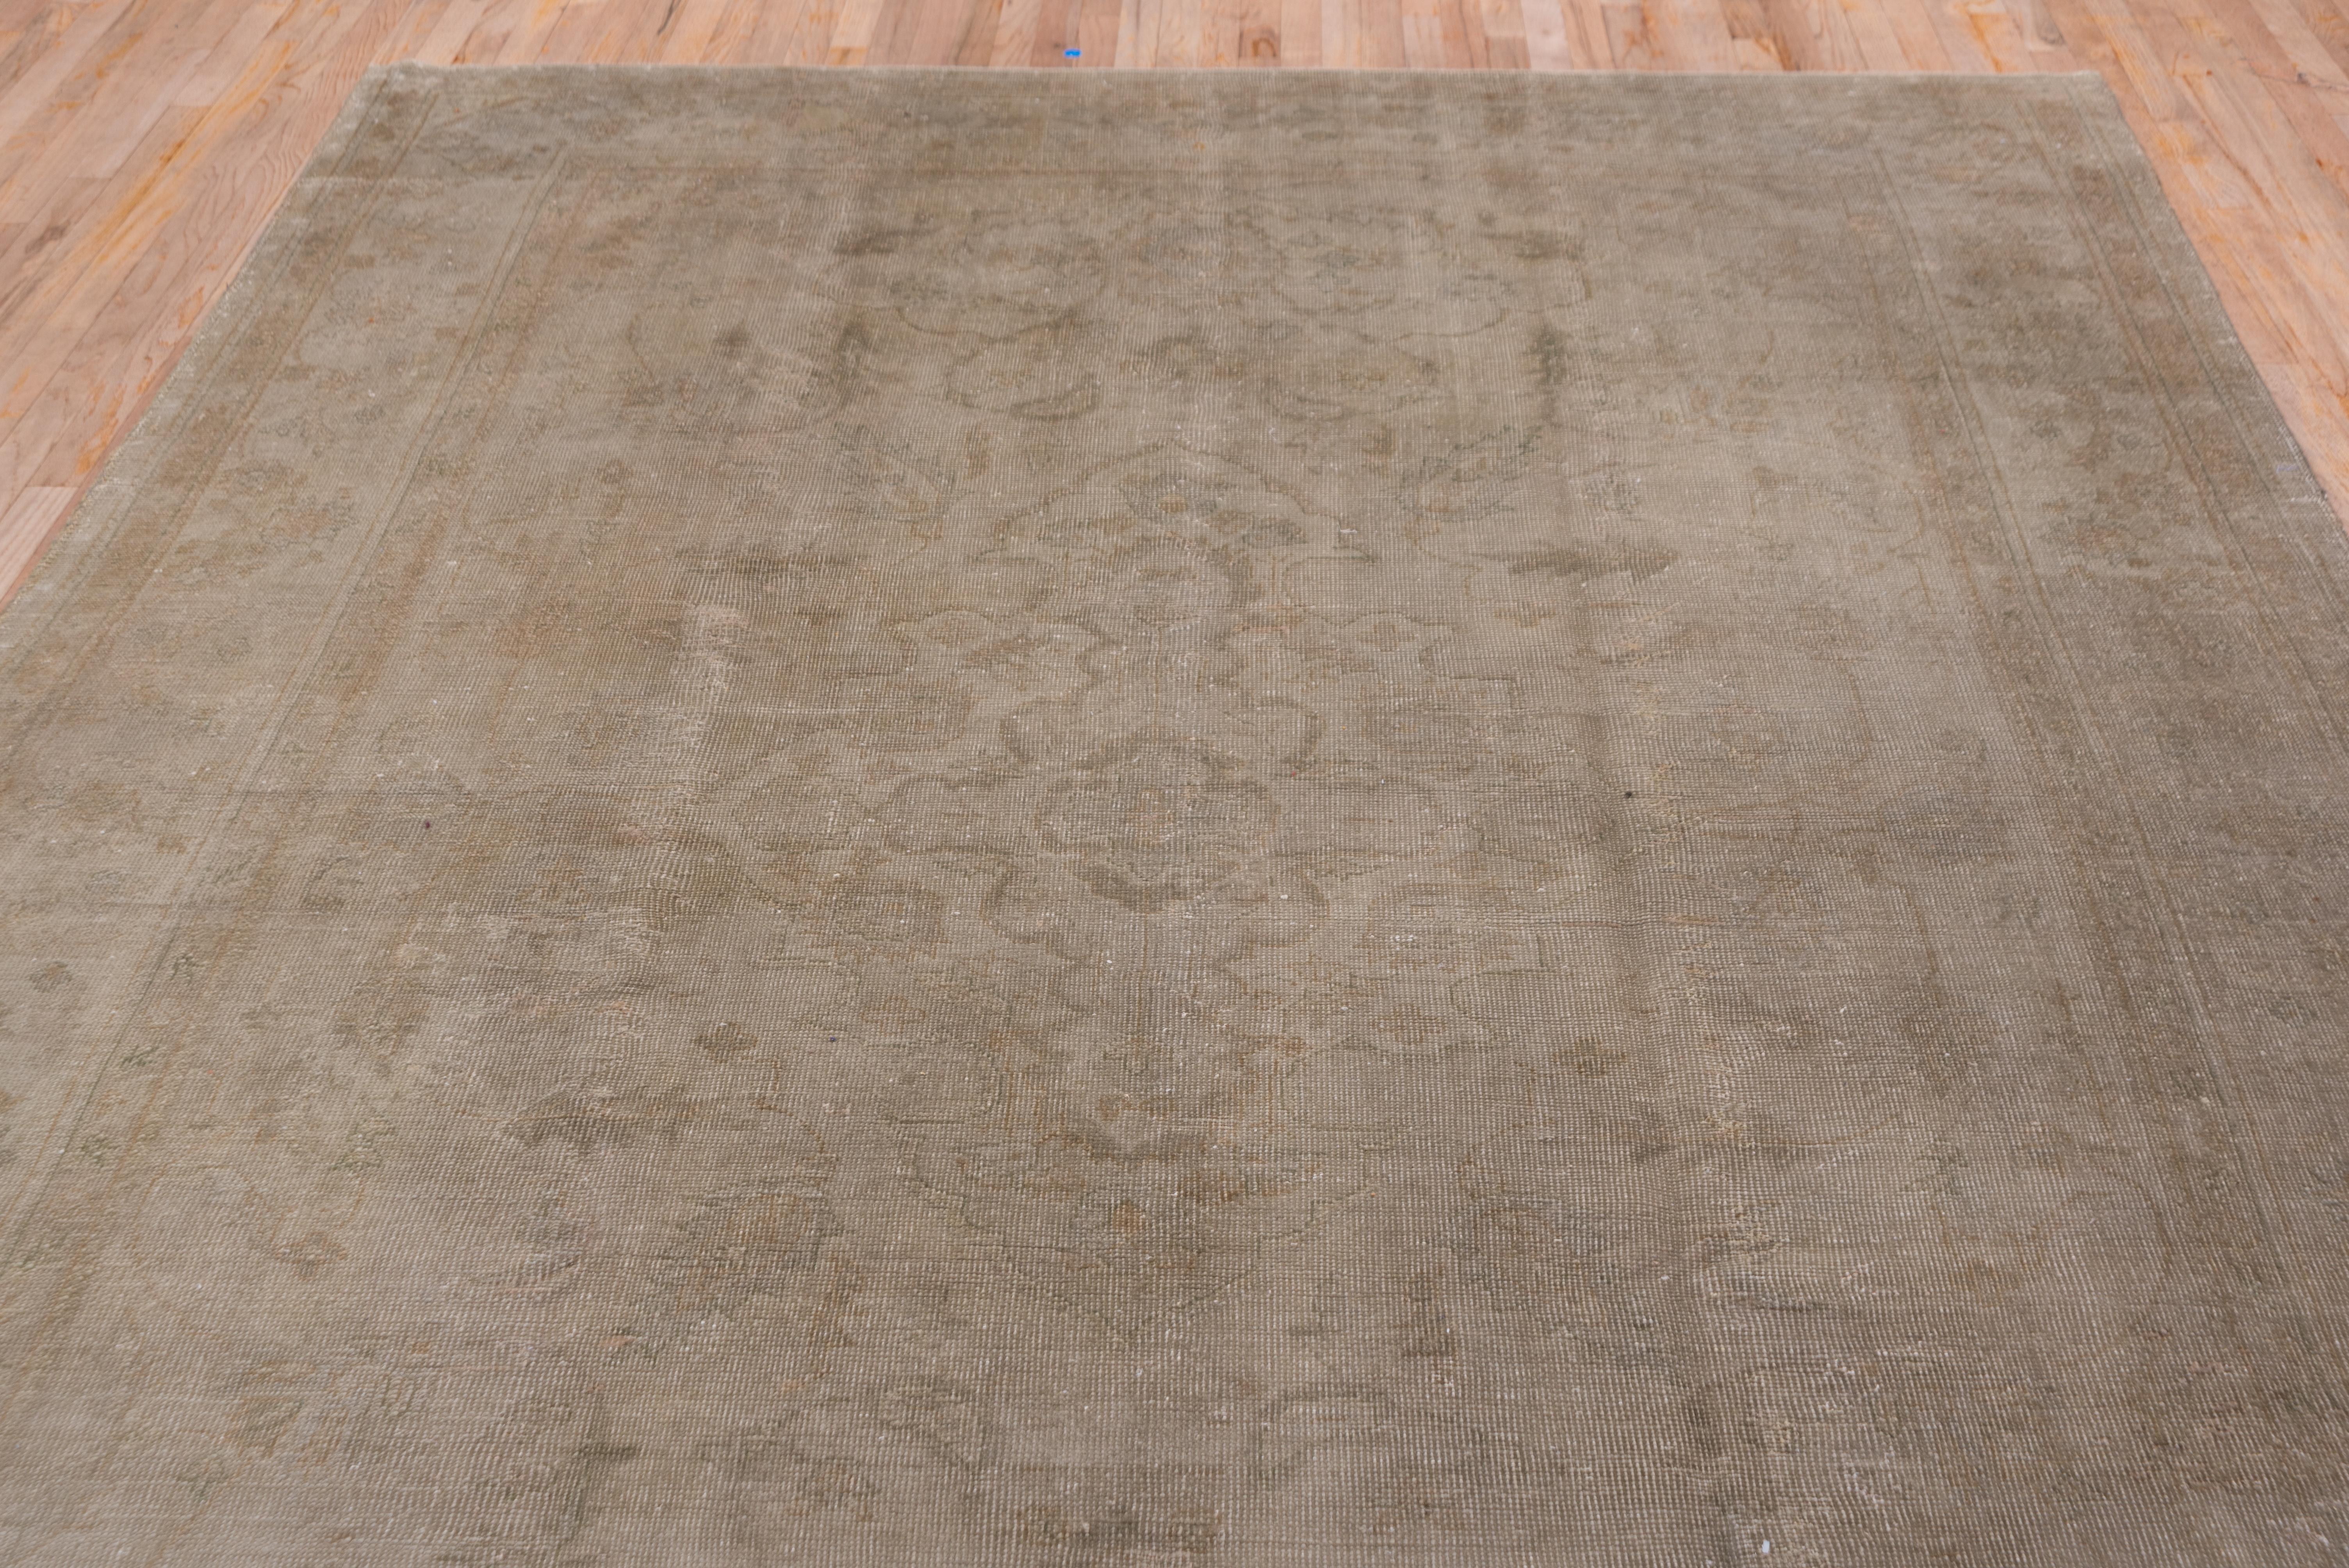 1920s Classic Antique Turkish Oushak Rug, Neutral Monochromatic Palette In Good Condition For Sale In New York, NY